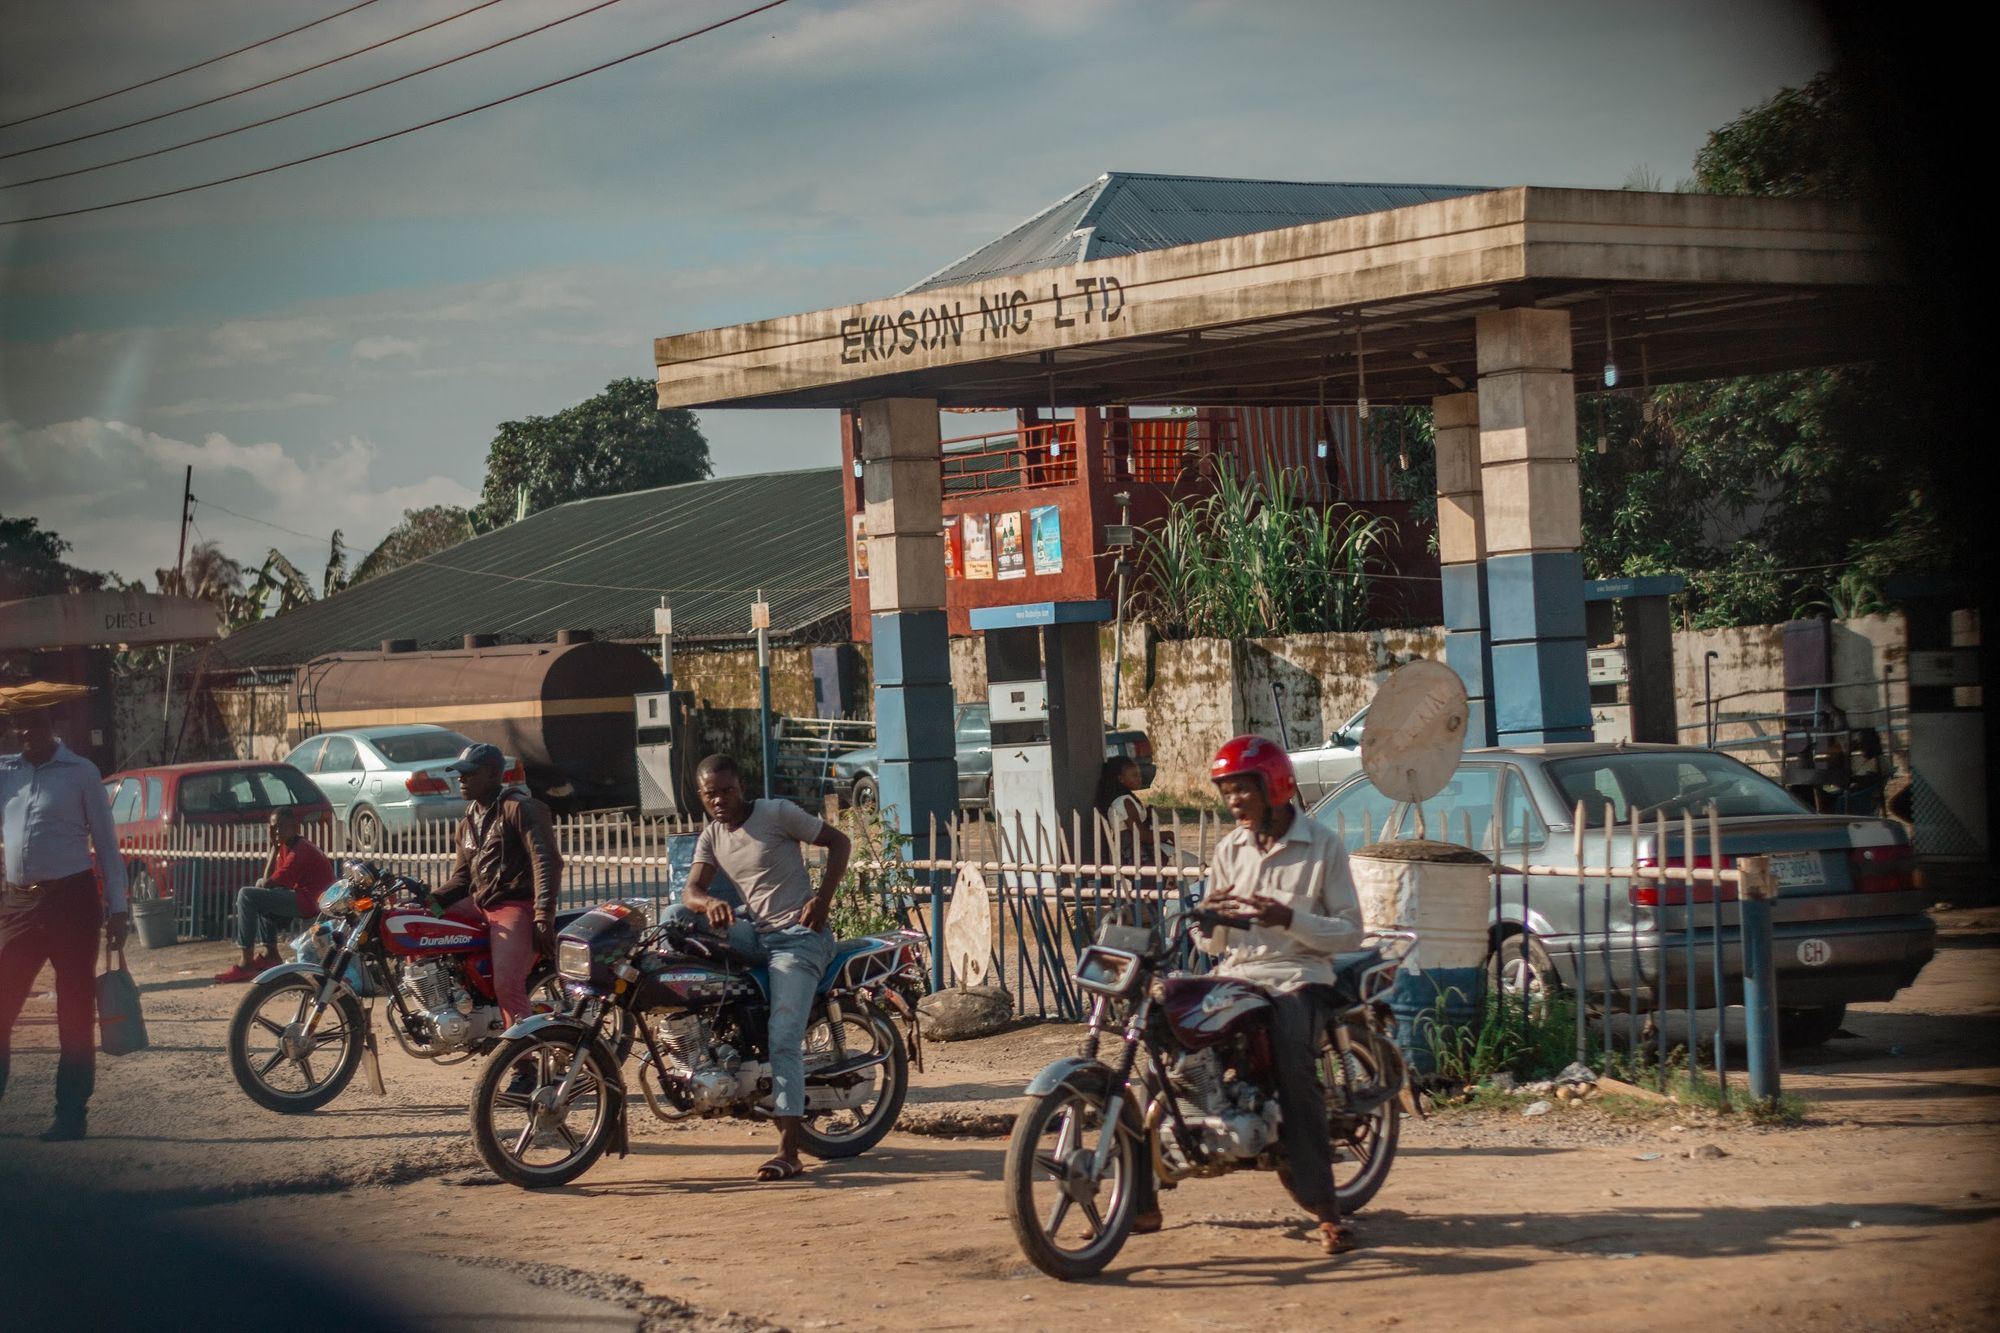 Three men each on their parked motorcycle in Ediba: A photo by David Elikwu